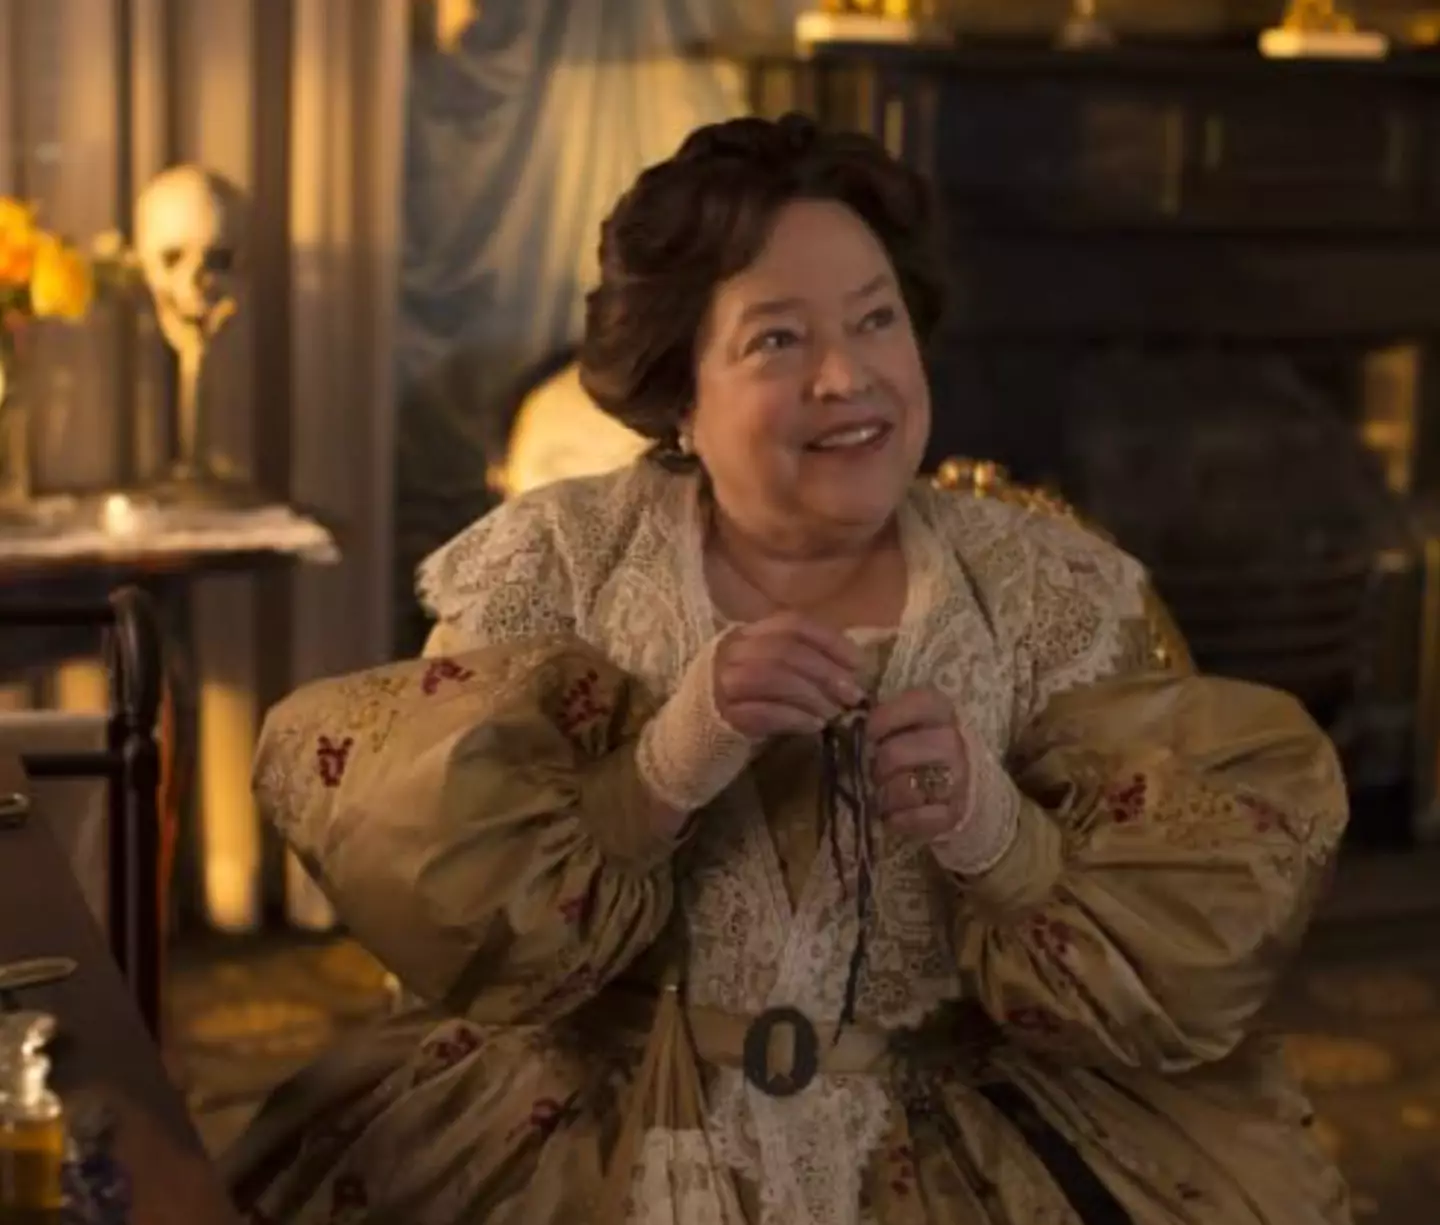 Kathy Bates played Madame LaLaurie in American Horror Story.